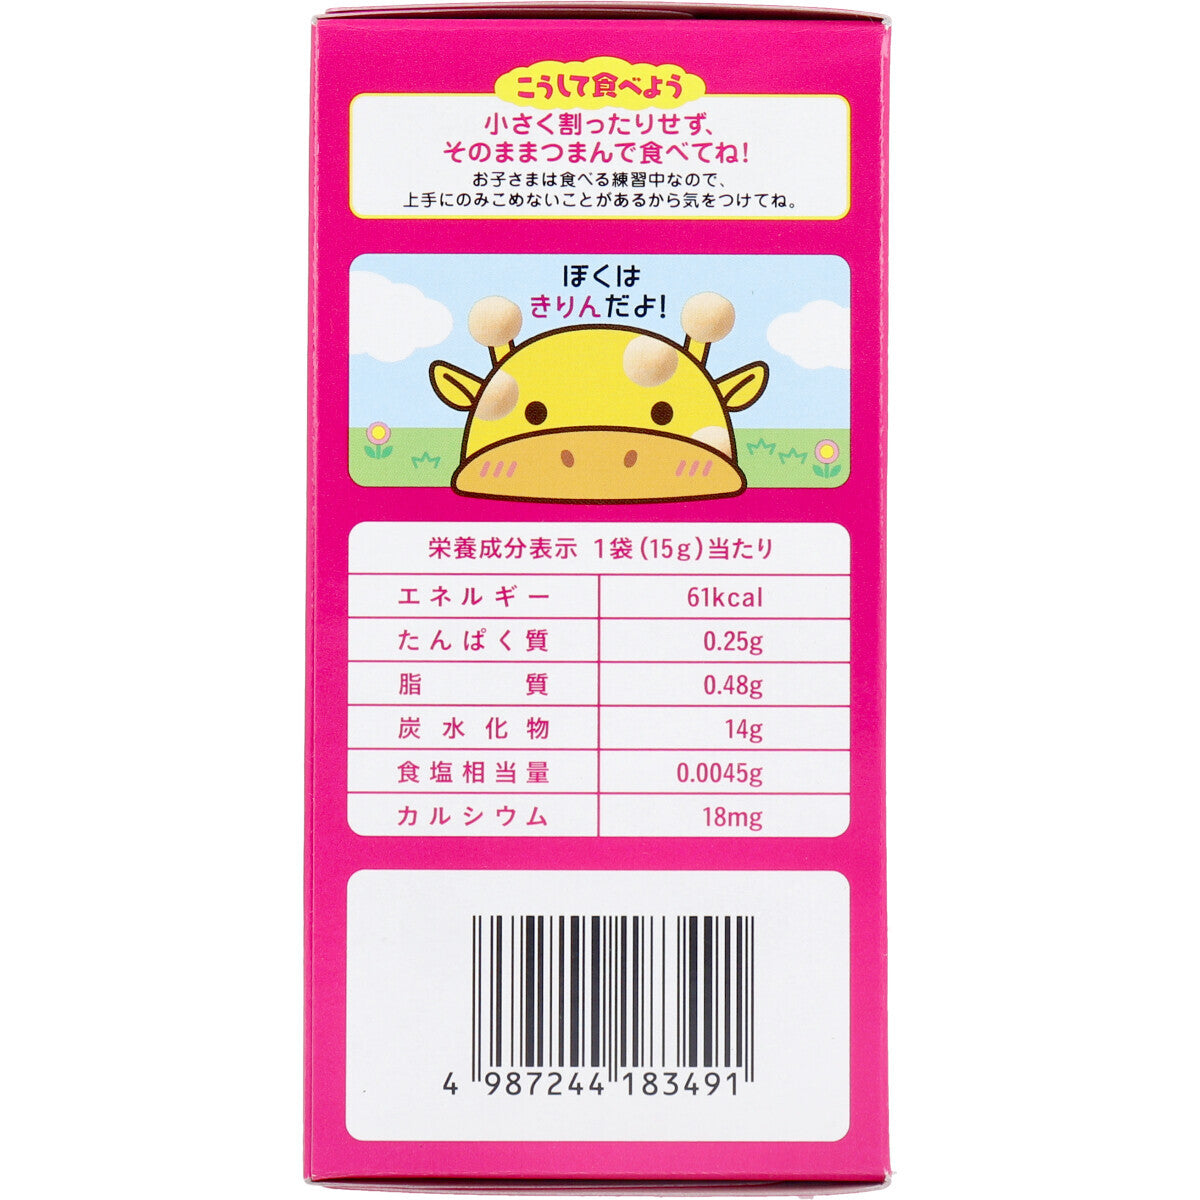 Wakodo - Baby Snack + Ca Egg Bolo Biscuits 15g x 3 bags